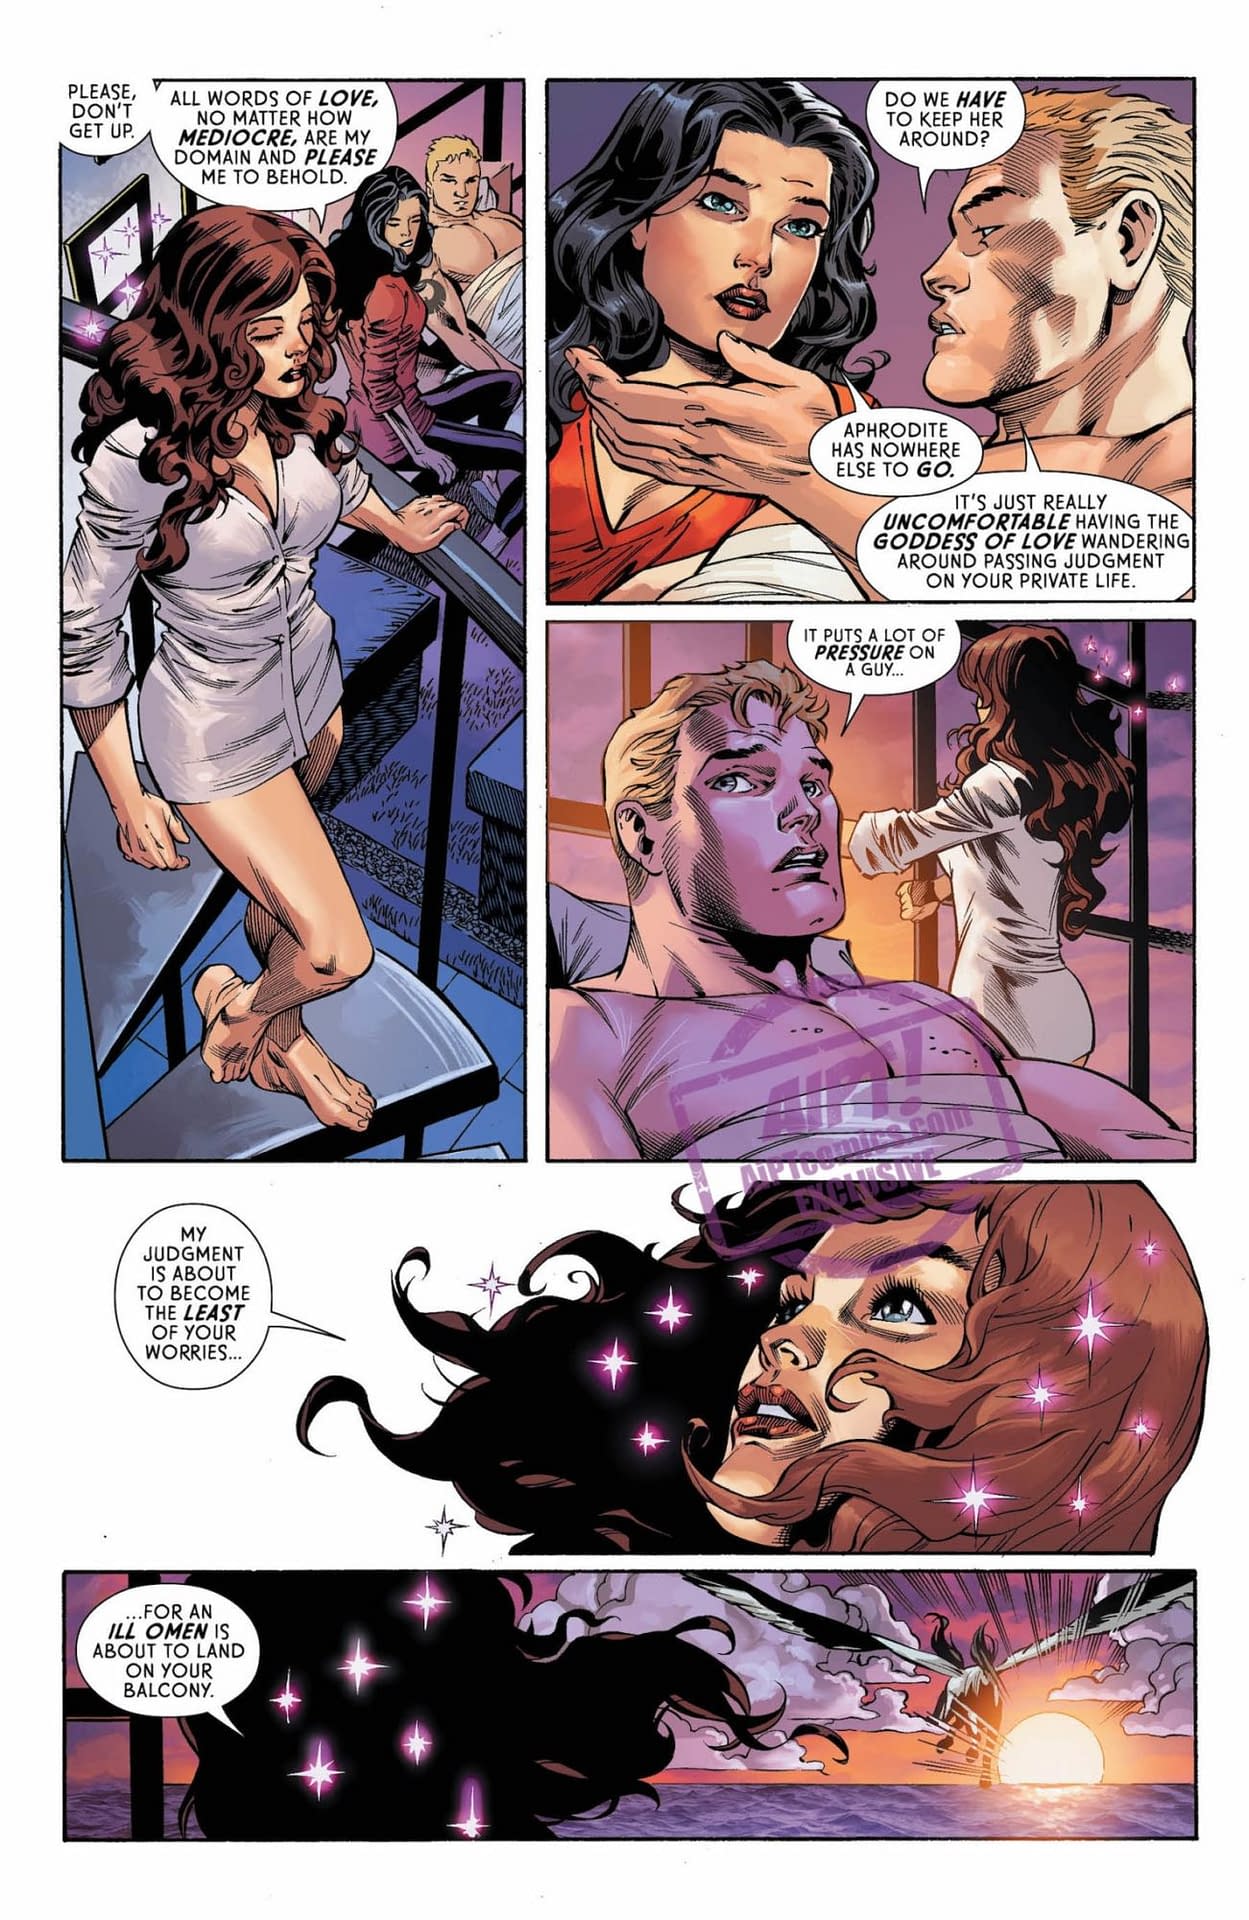 The Pressure of Aphrodite Judging Your Love Life in Tomorrow's Wonder Woman #64 (Preview)